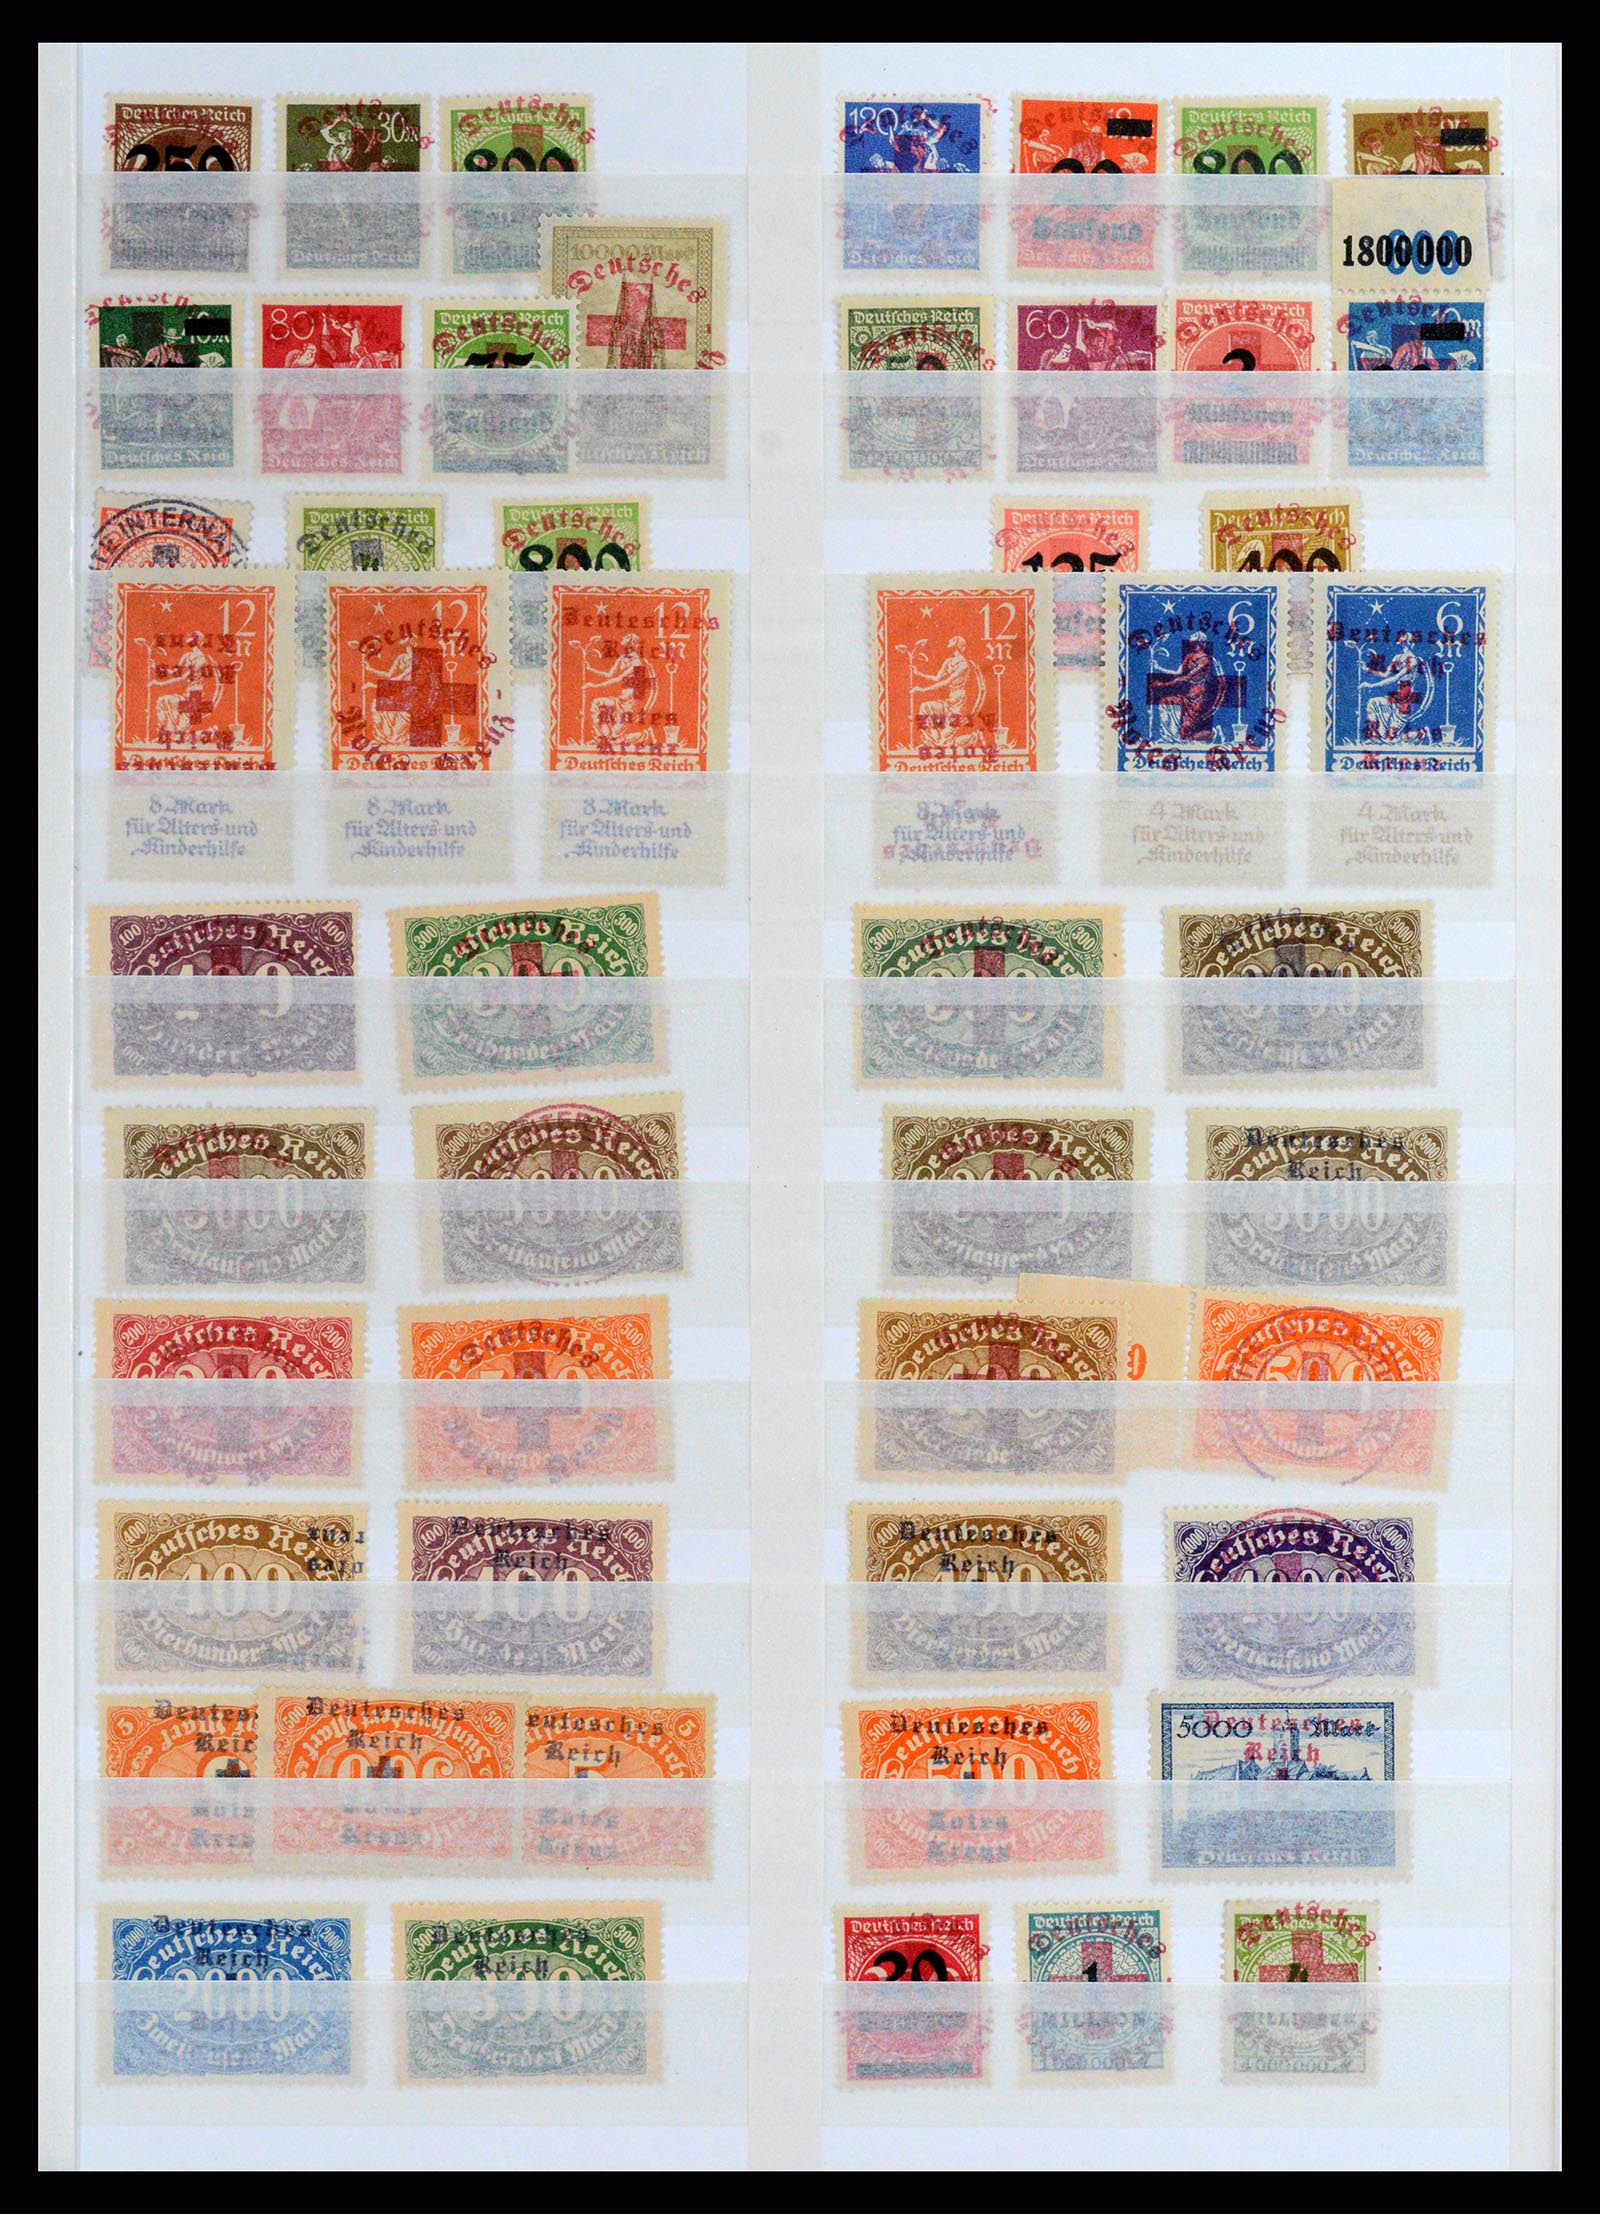 37885 040 - Stamp Collection 37885 Theme Red Cross 1906-2000.